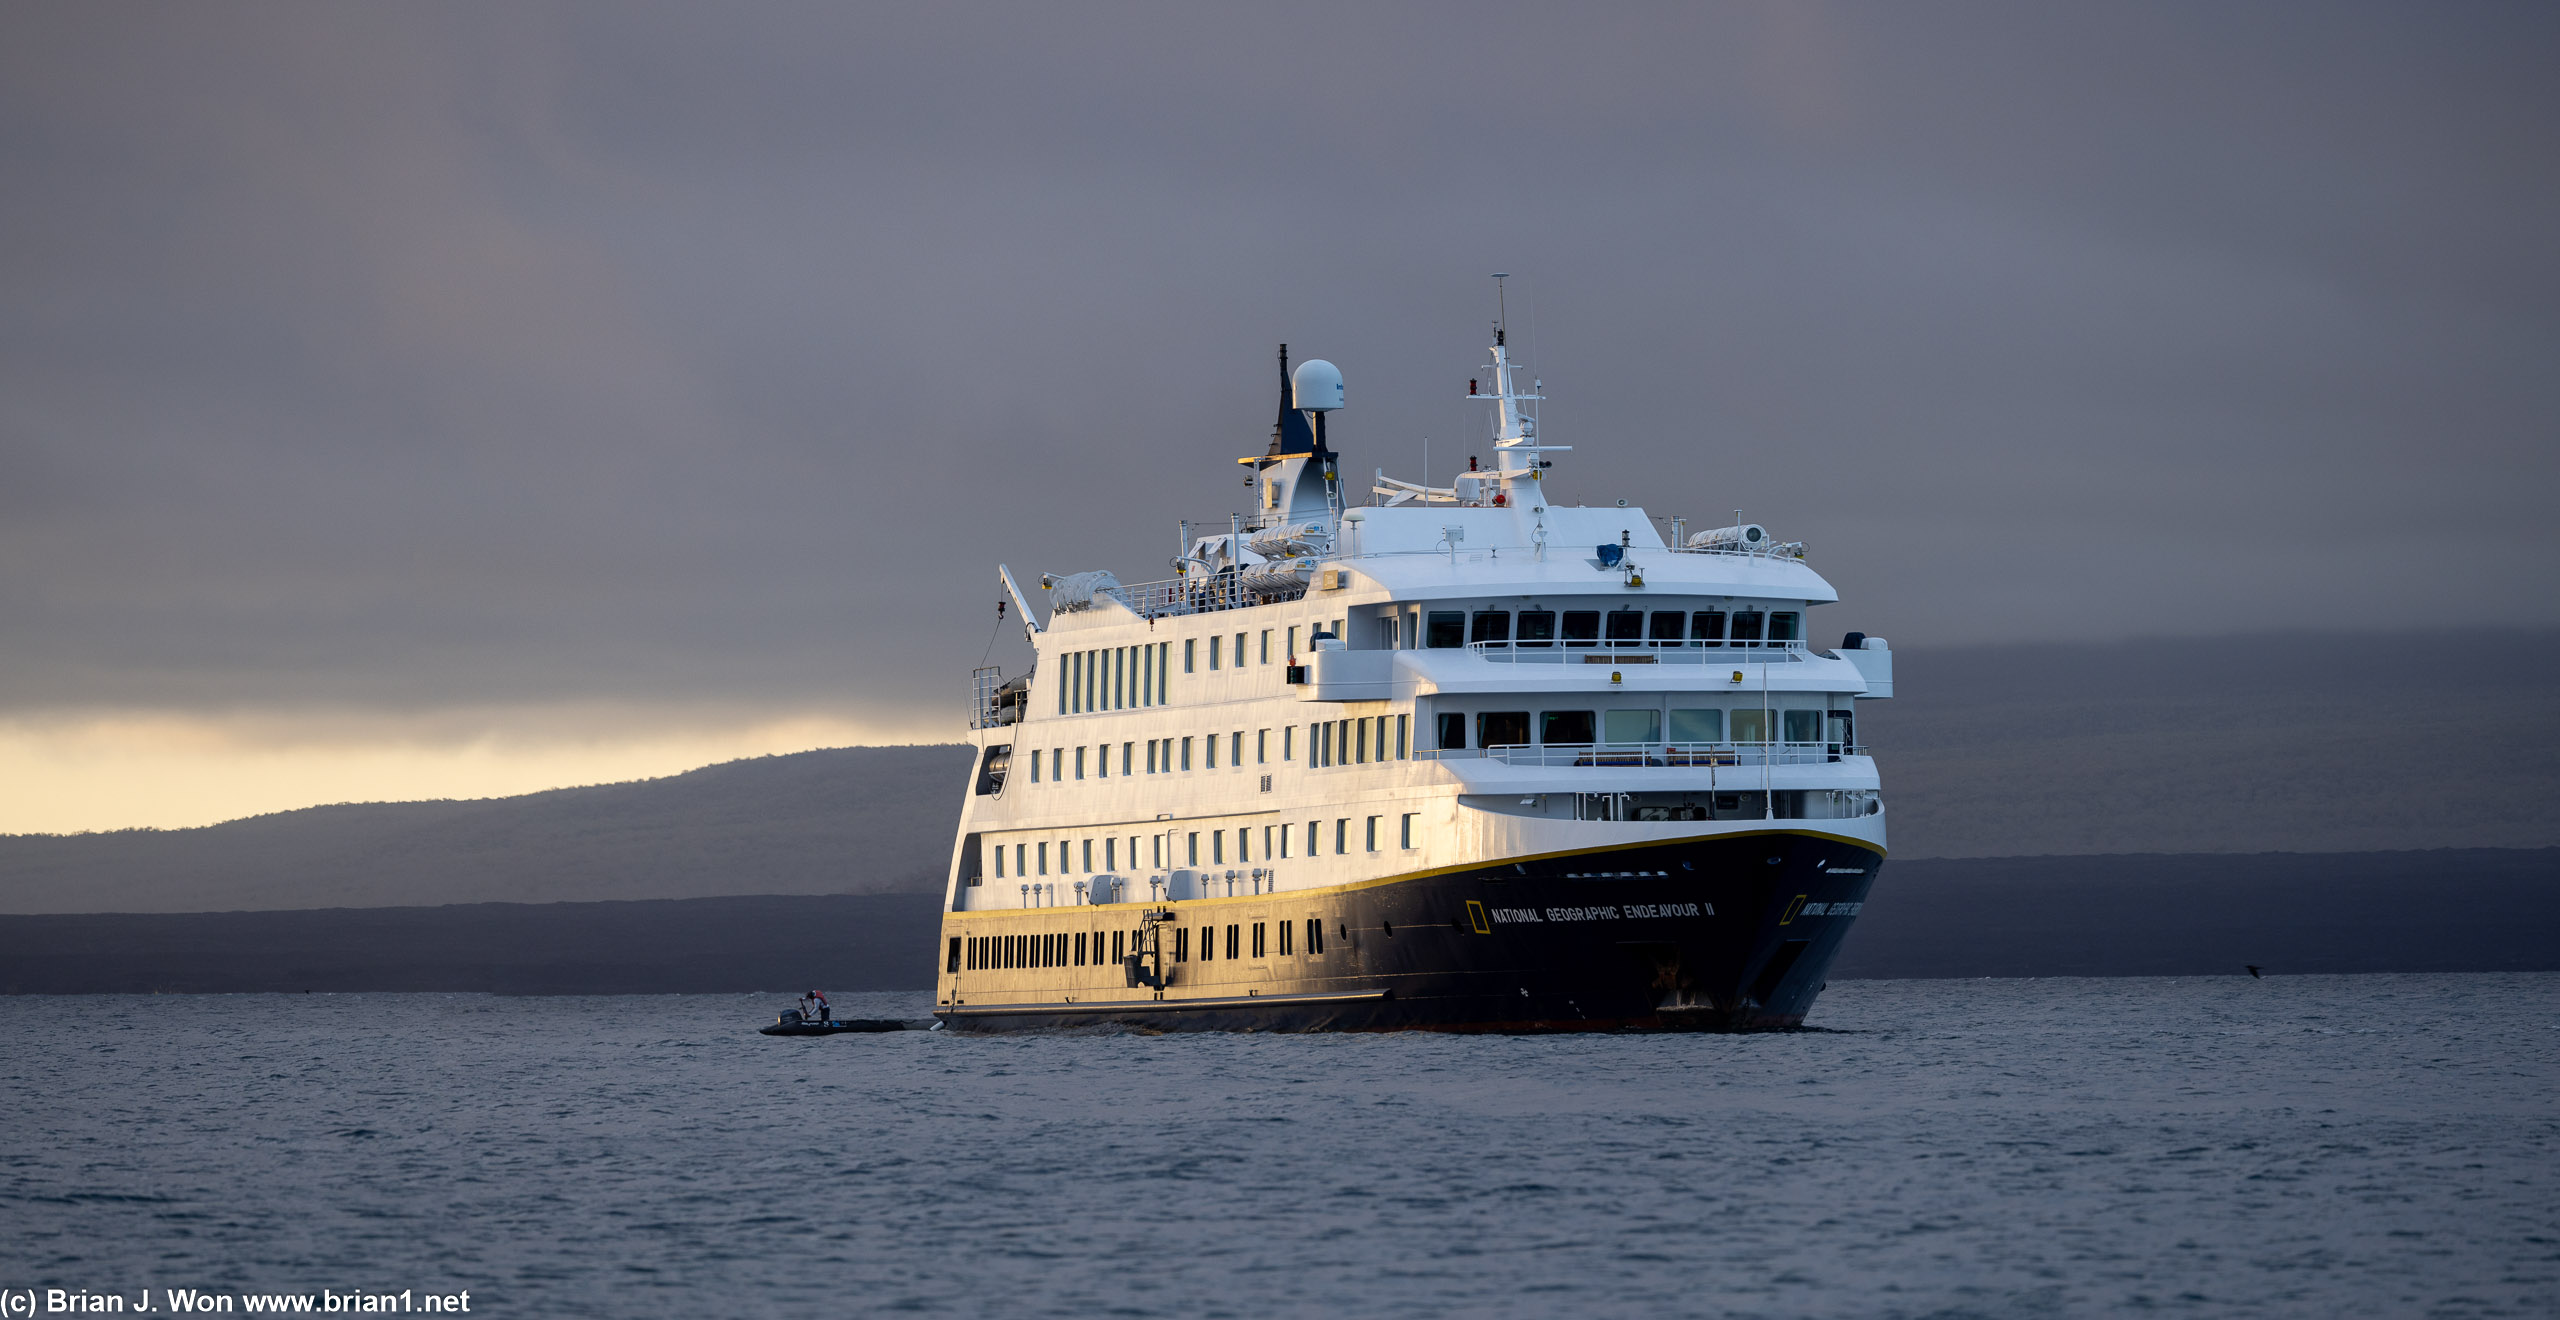 Sunset shines on the National Geographic Endeavour II.